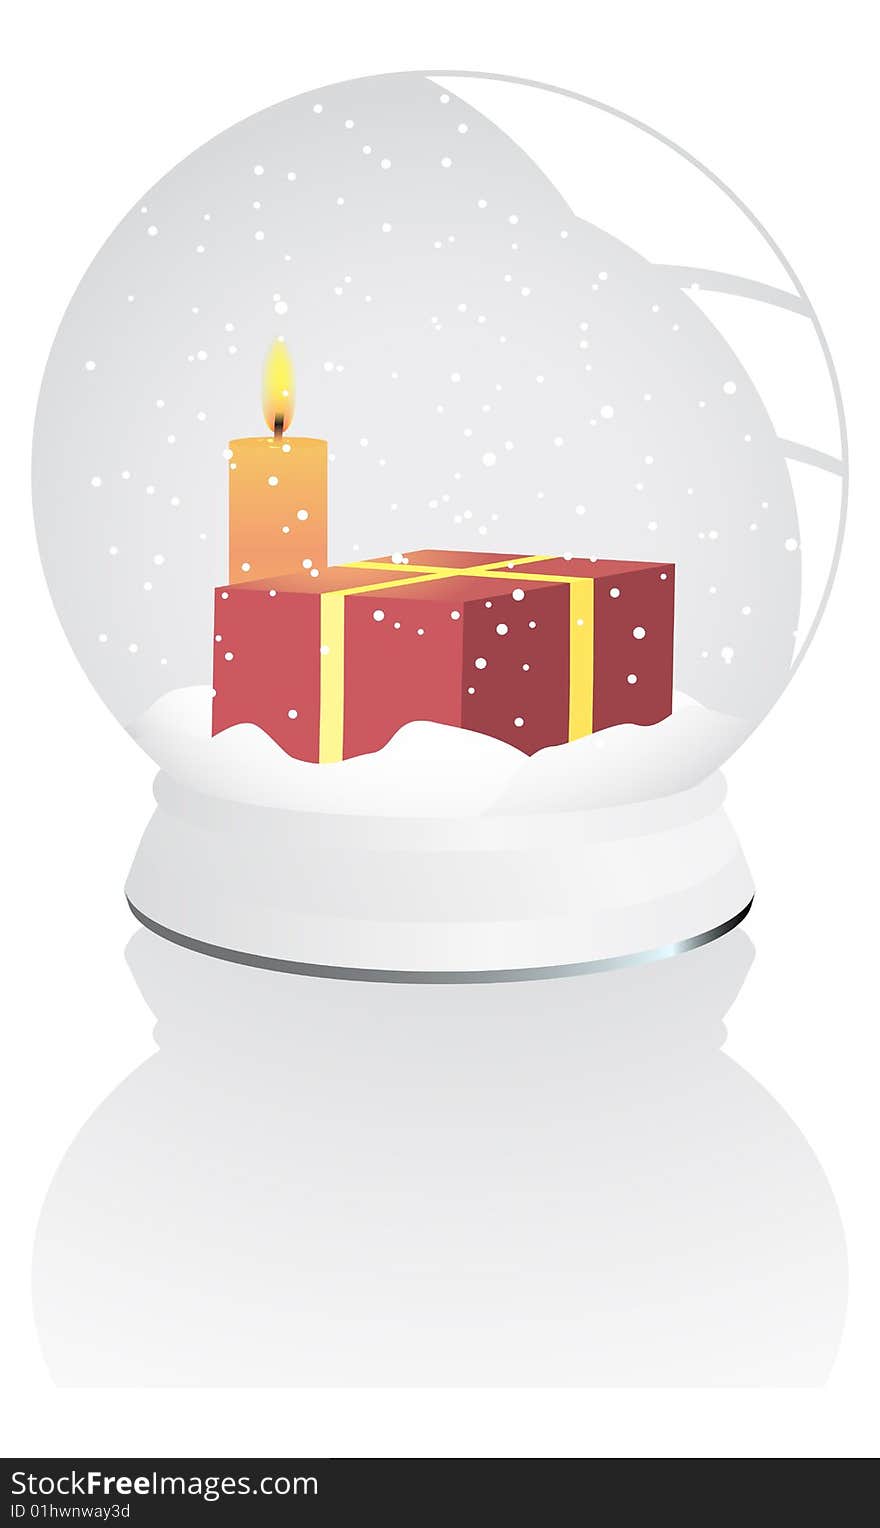 Globe over white with candle and present. Globe over white with candle and present.